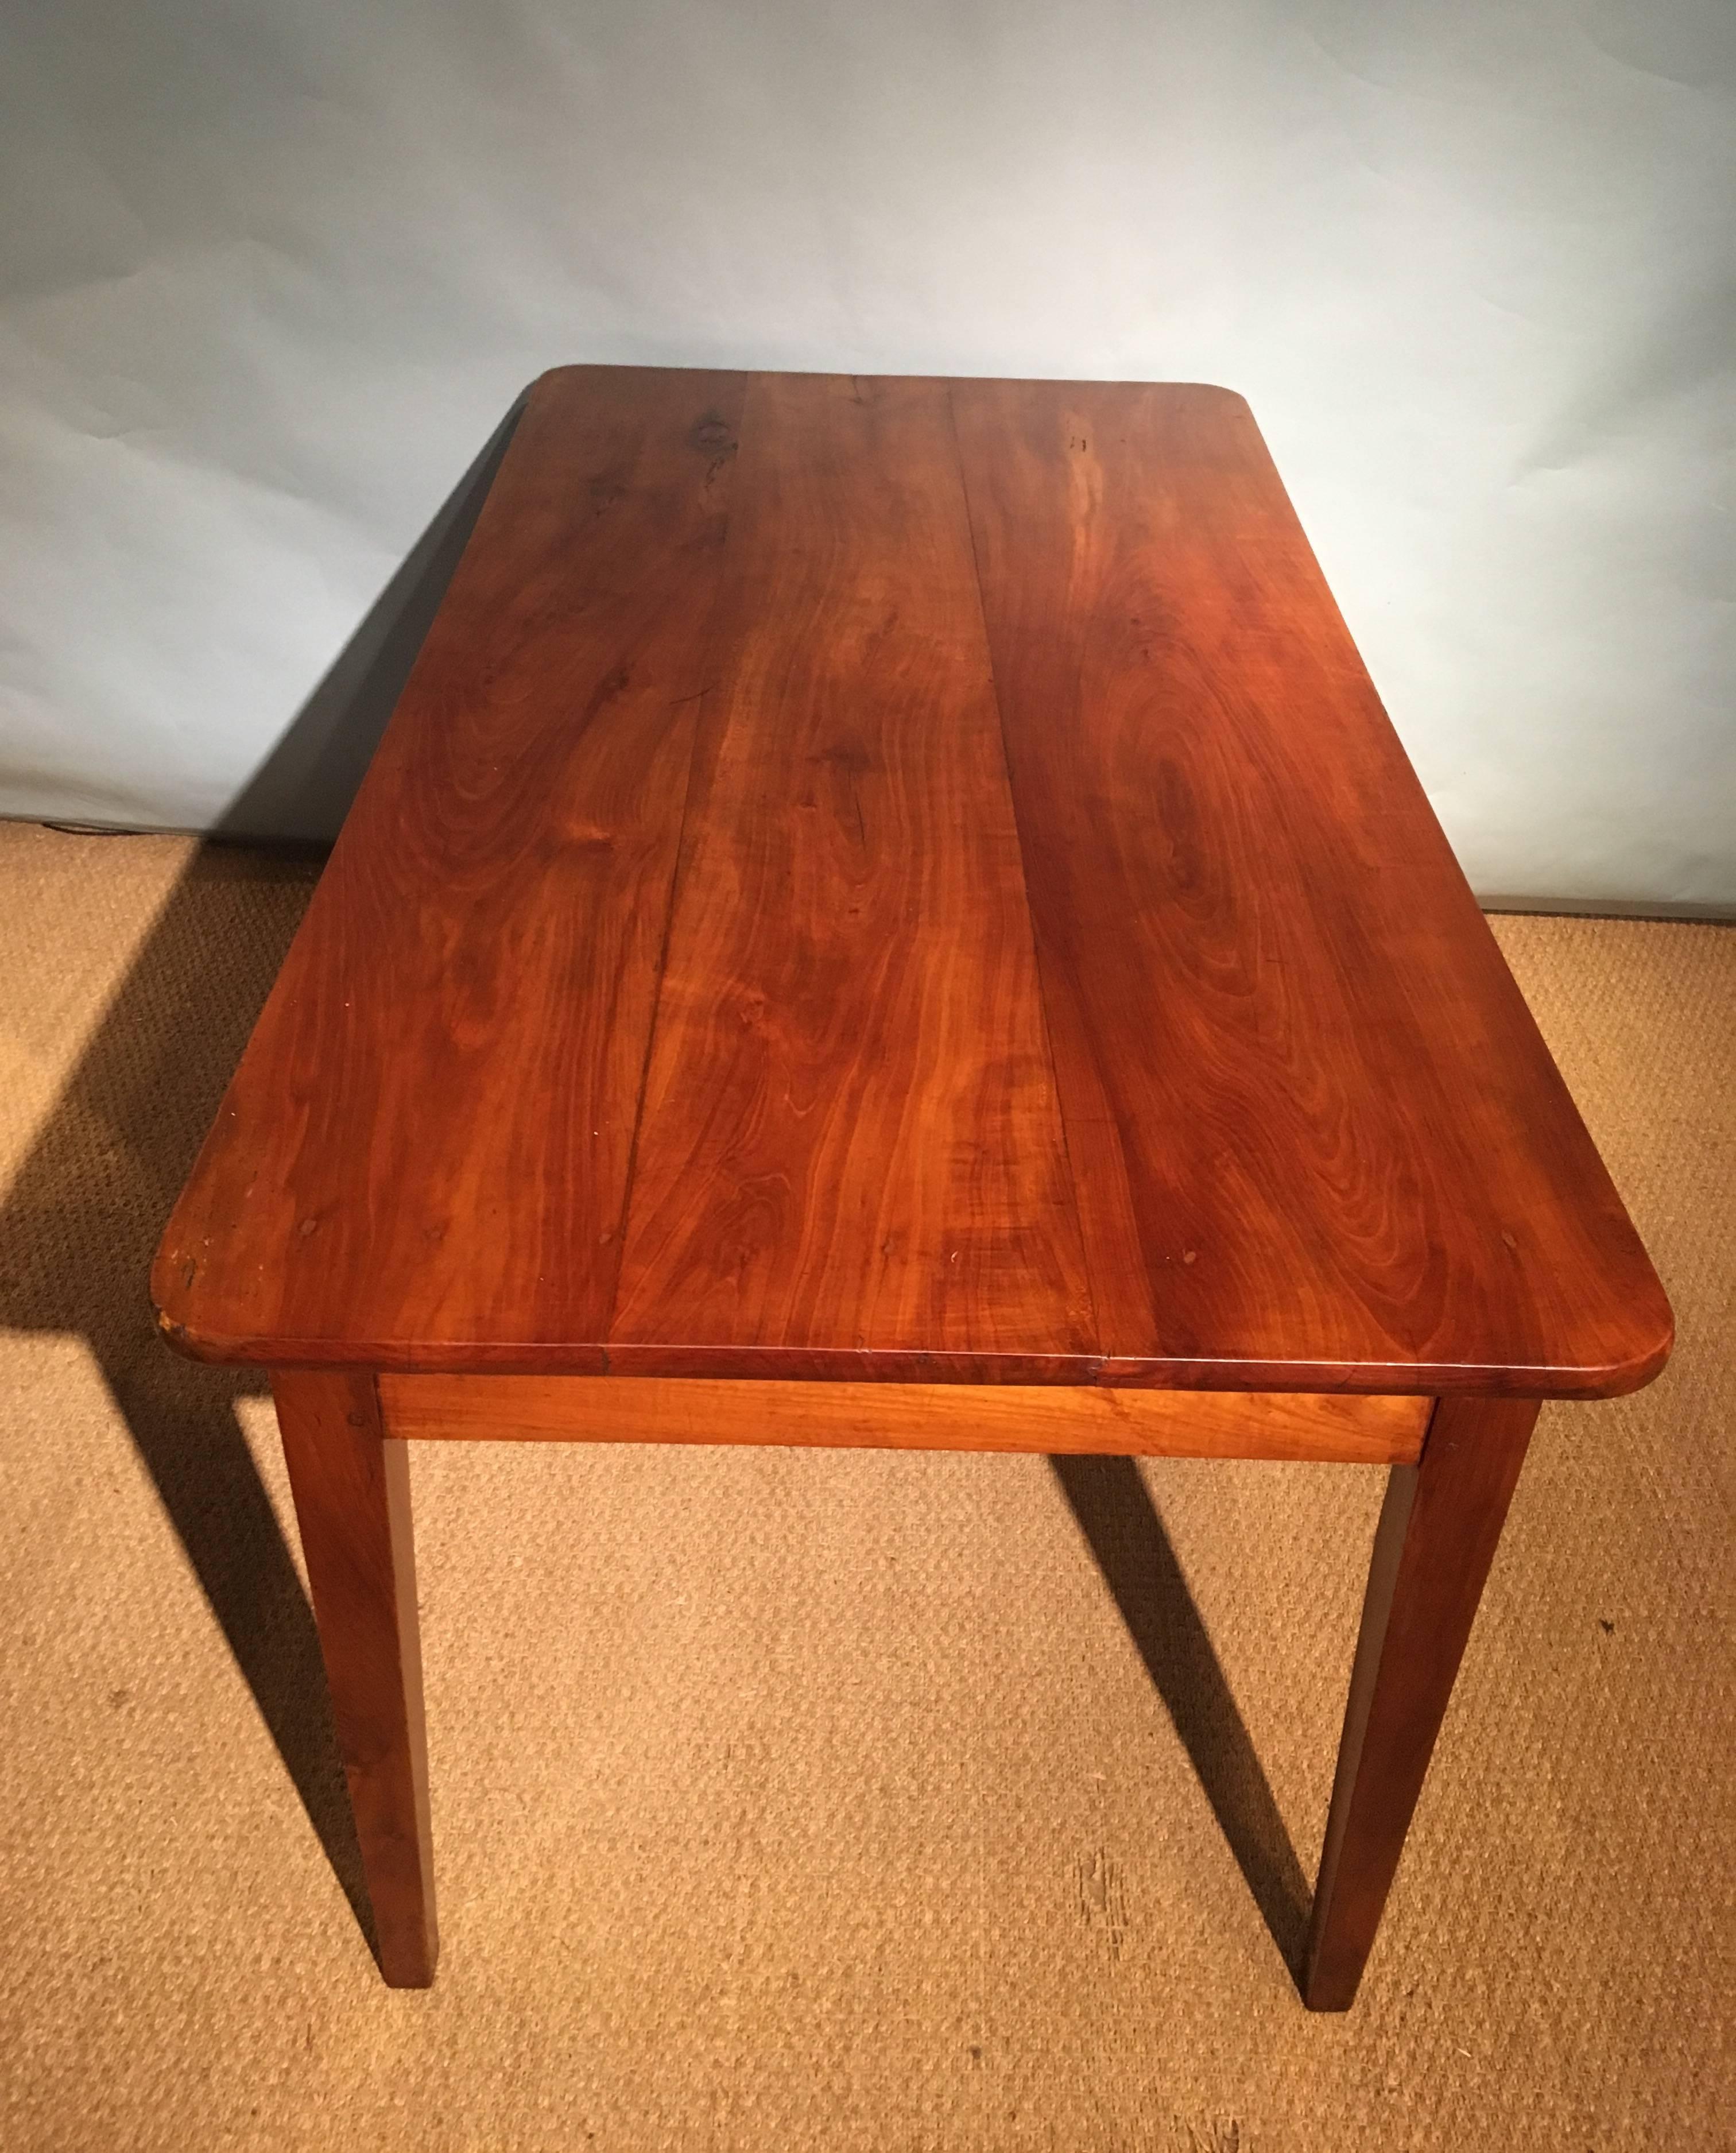 Lovely 19th century cherrywood farmhouse table 

Great neat sized table that will comfortably seat six people dating to circa 1860s fab color / patin

Three planks to the top ( good thick boards ) single drawer to the side 

This piece has